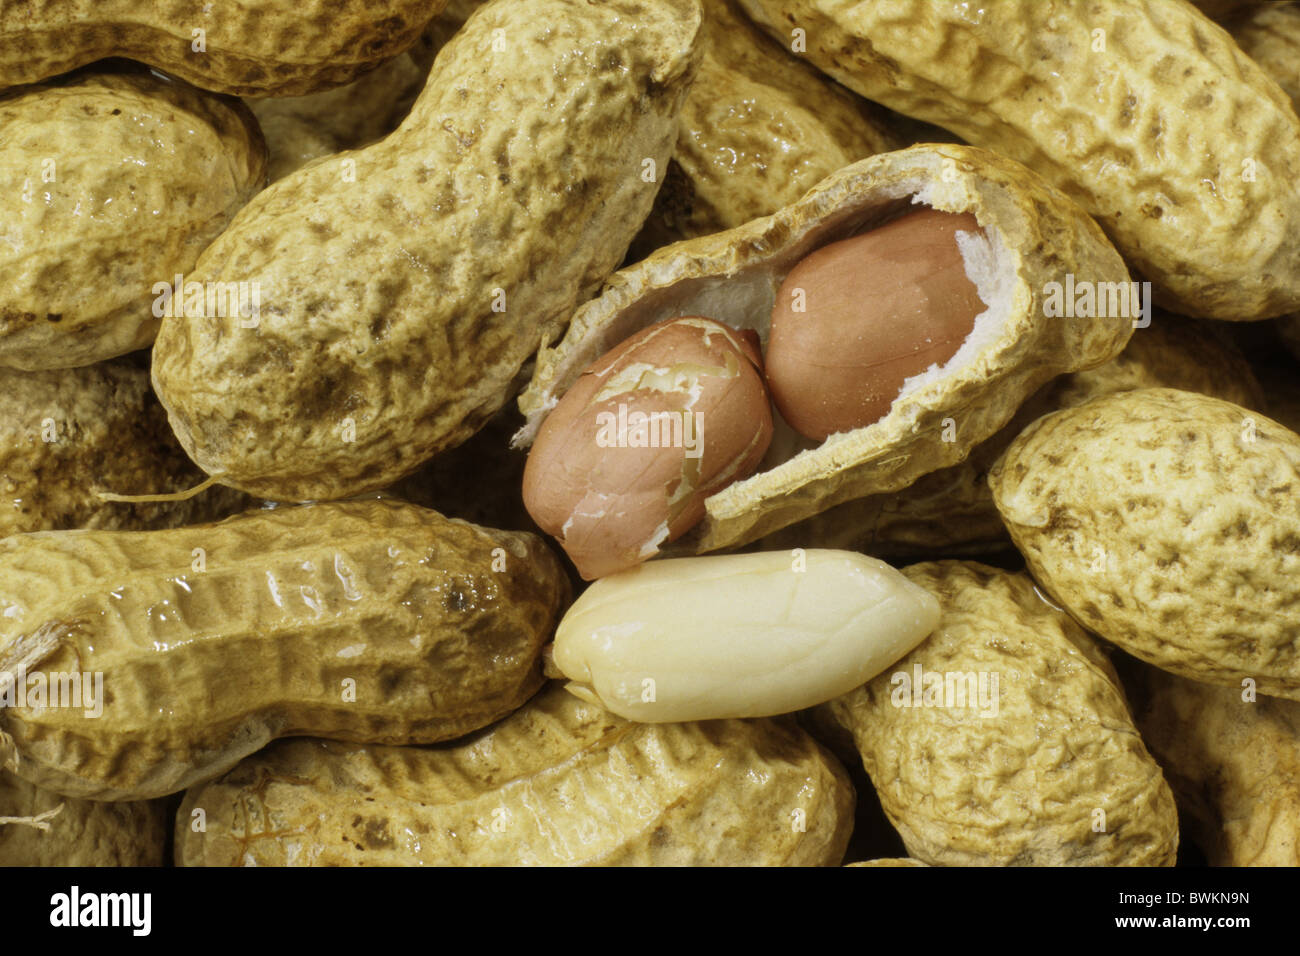 Peanut (Arachis hypogaea). Peanut shells, one split open revealing two seeds with their brown seed coats. Stock Photo